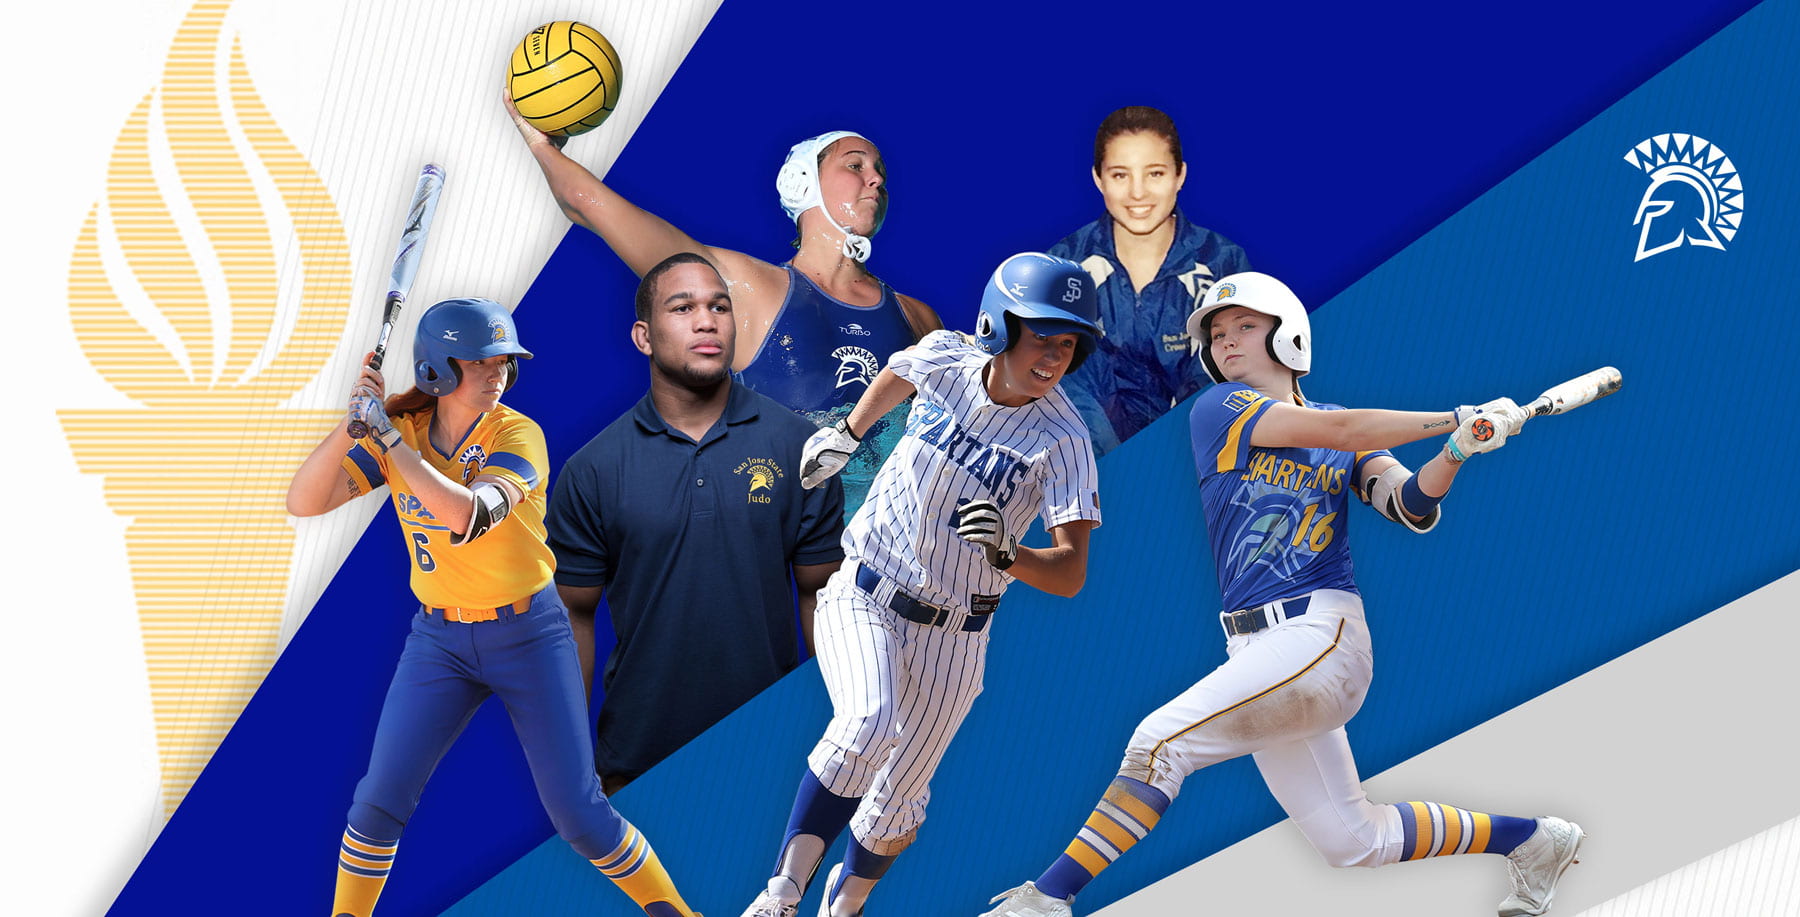 Collage of baseball, judo, waterpolo and track athletes.